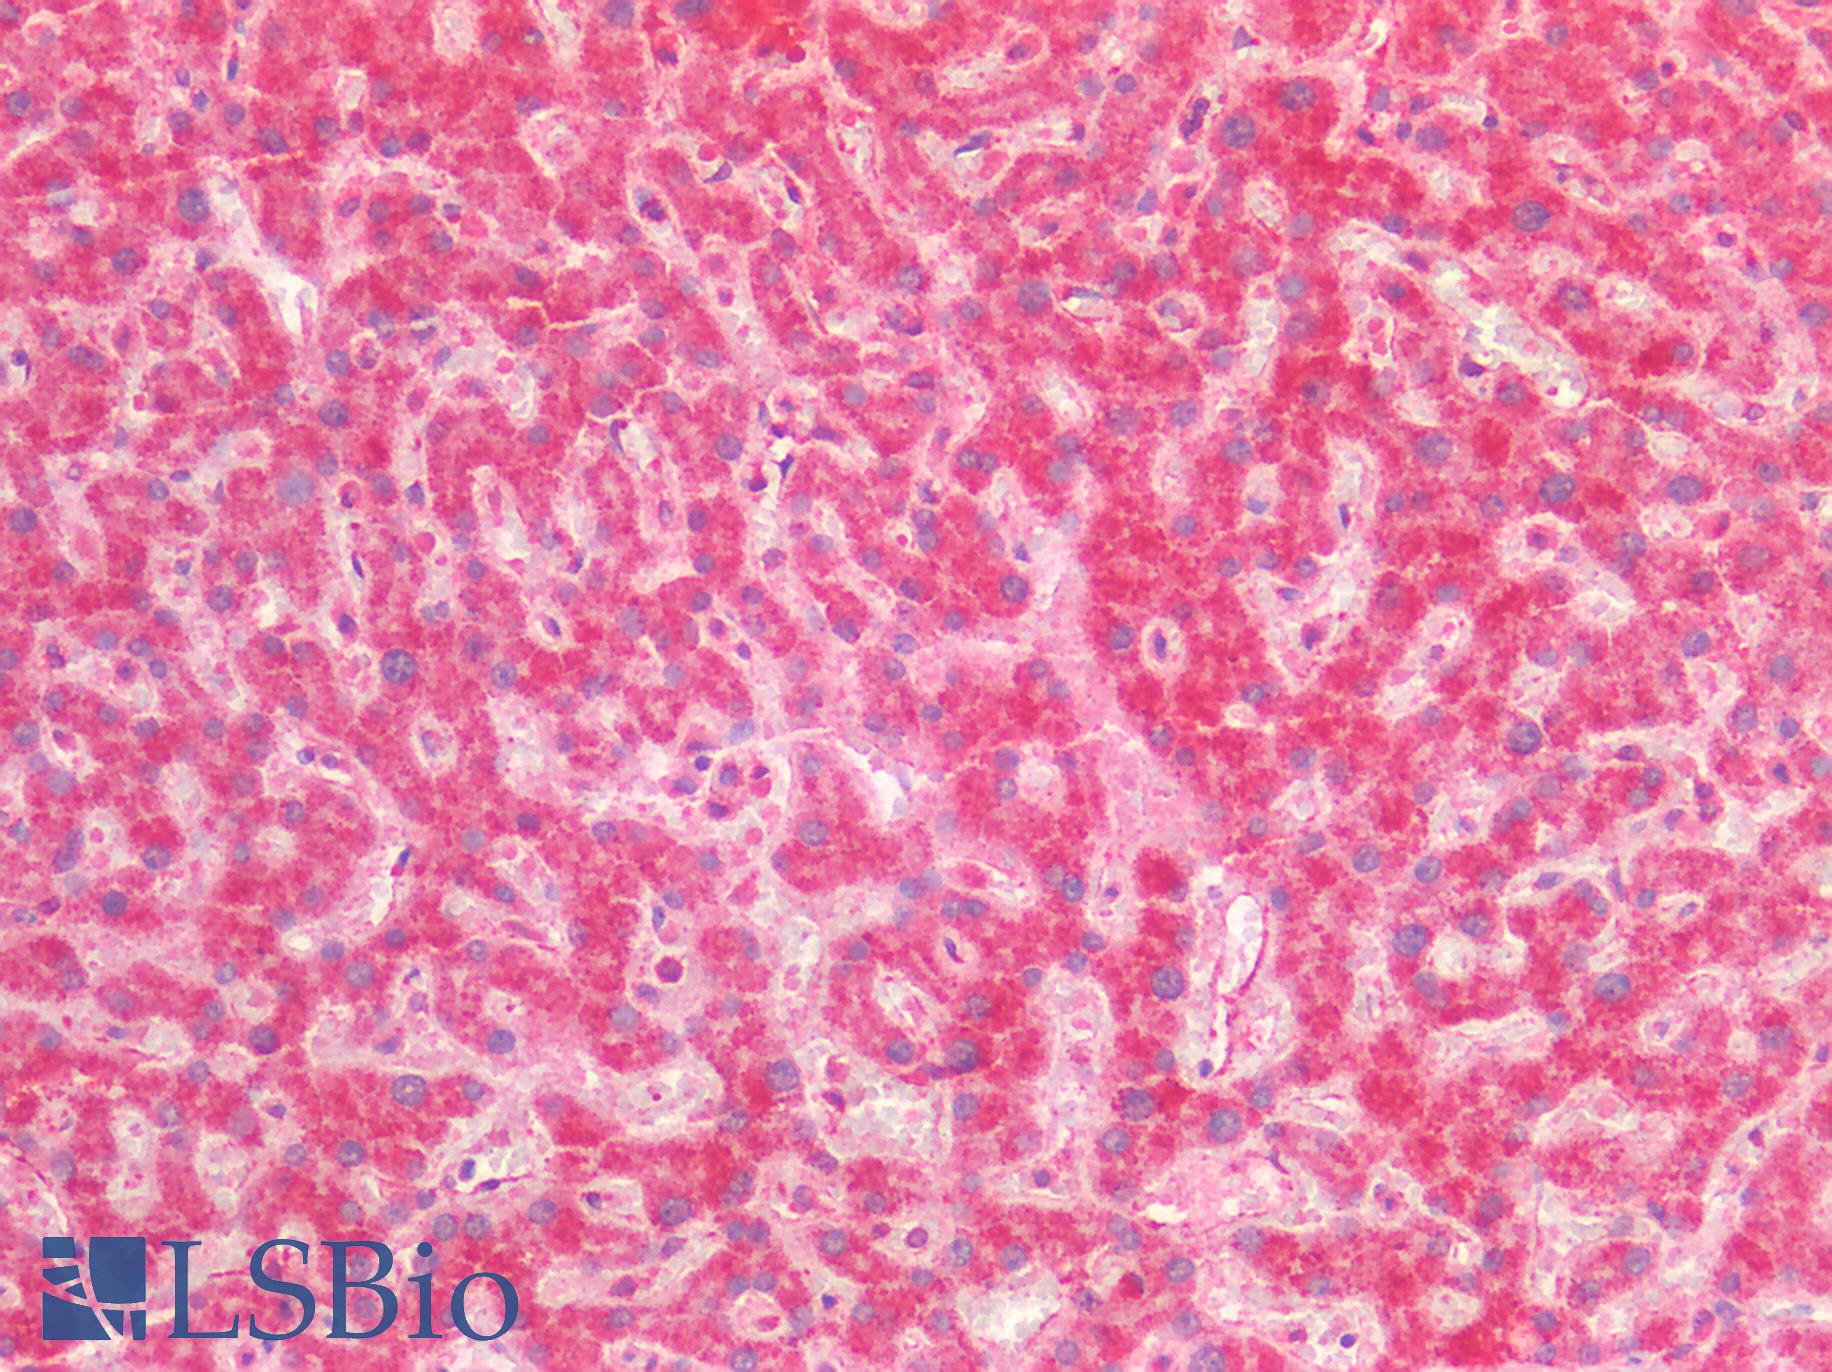 PTGS2 / COX2 / COX-2 Antibody - Human Liver: Formalin-Fixed, Paraffin-Embedded (FFPE)